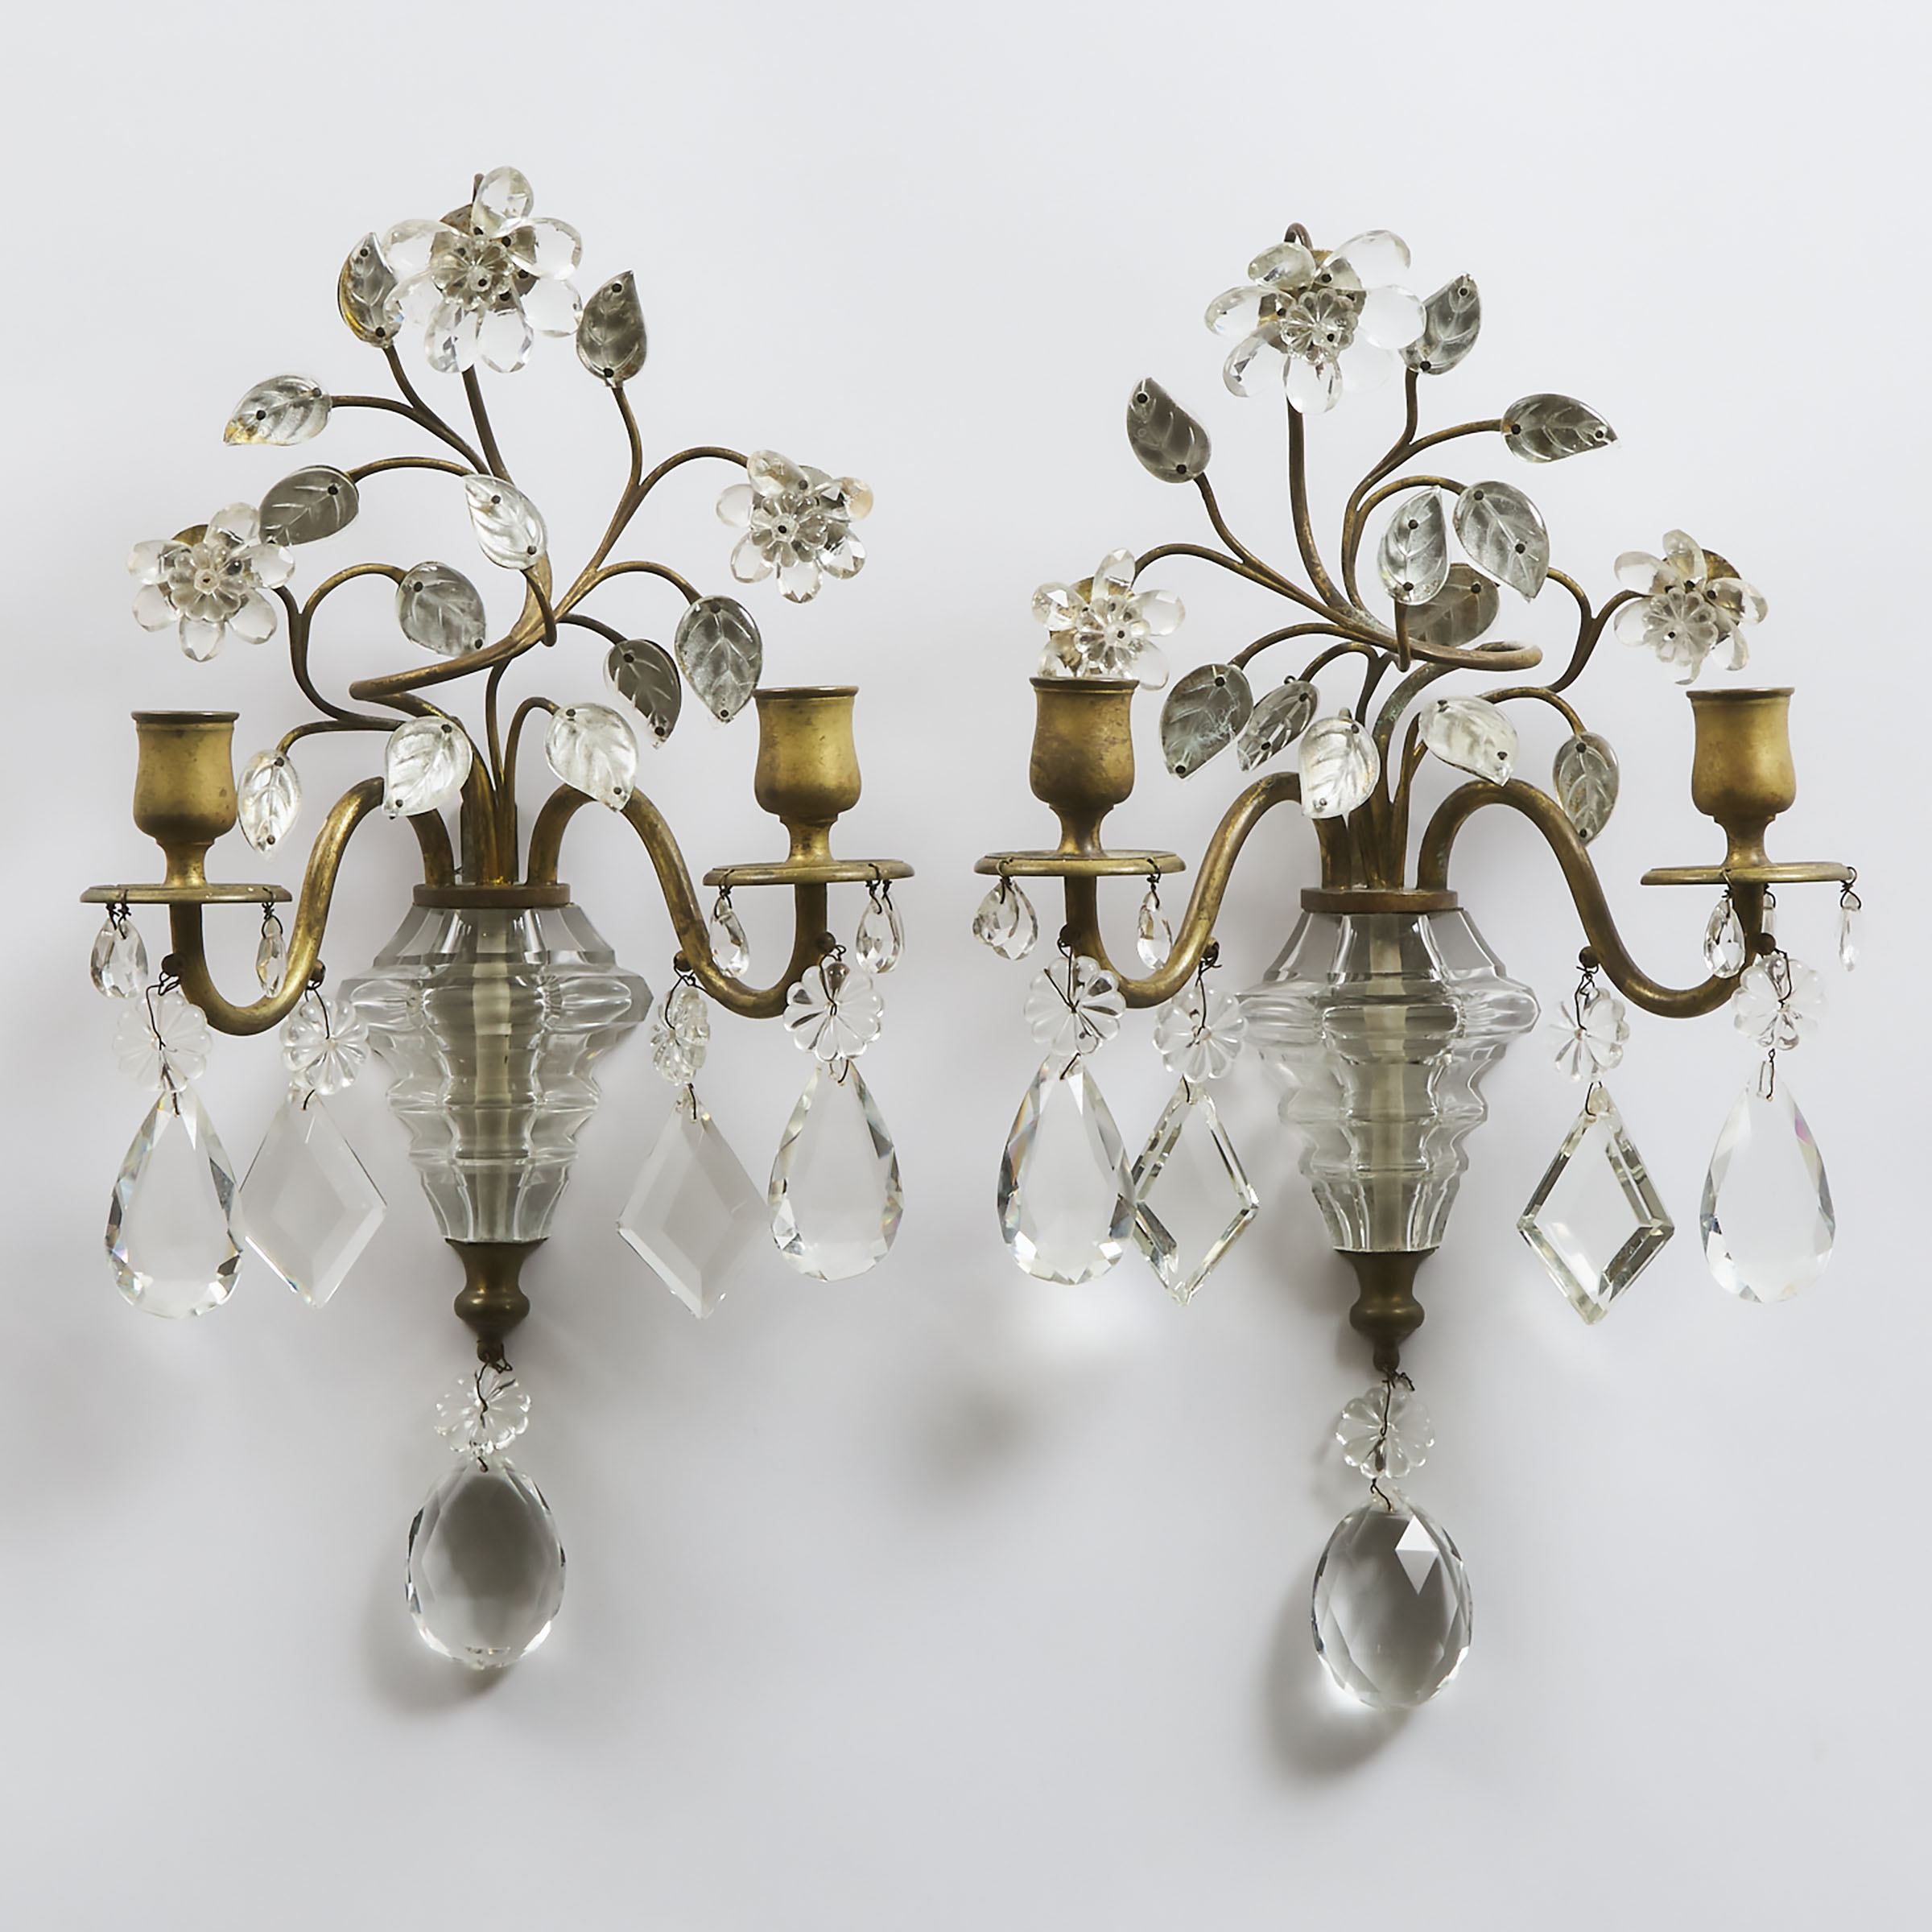 Pair of French Rock Crystal and Cut Glass Two-Light Sconces, mid 19th century